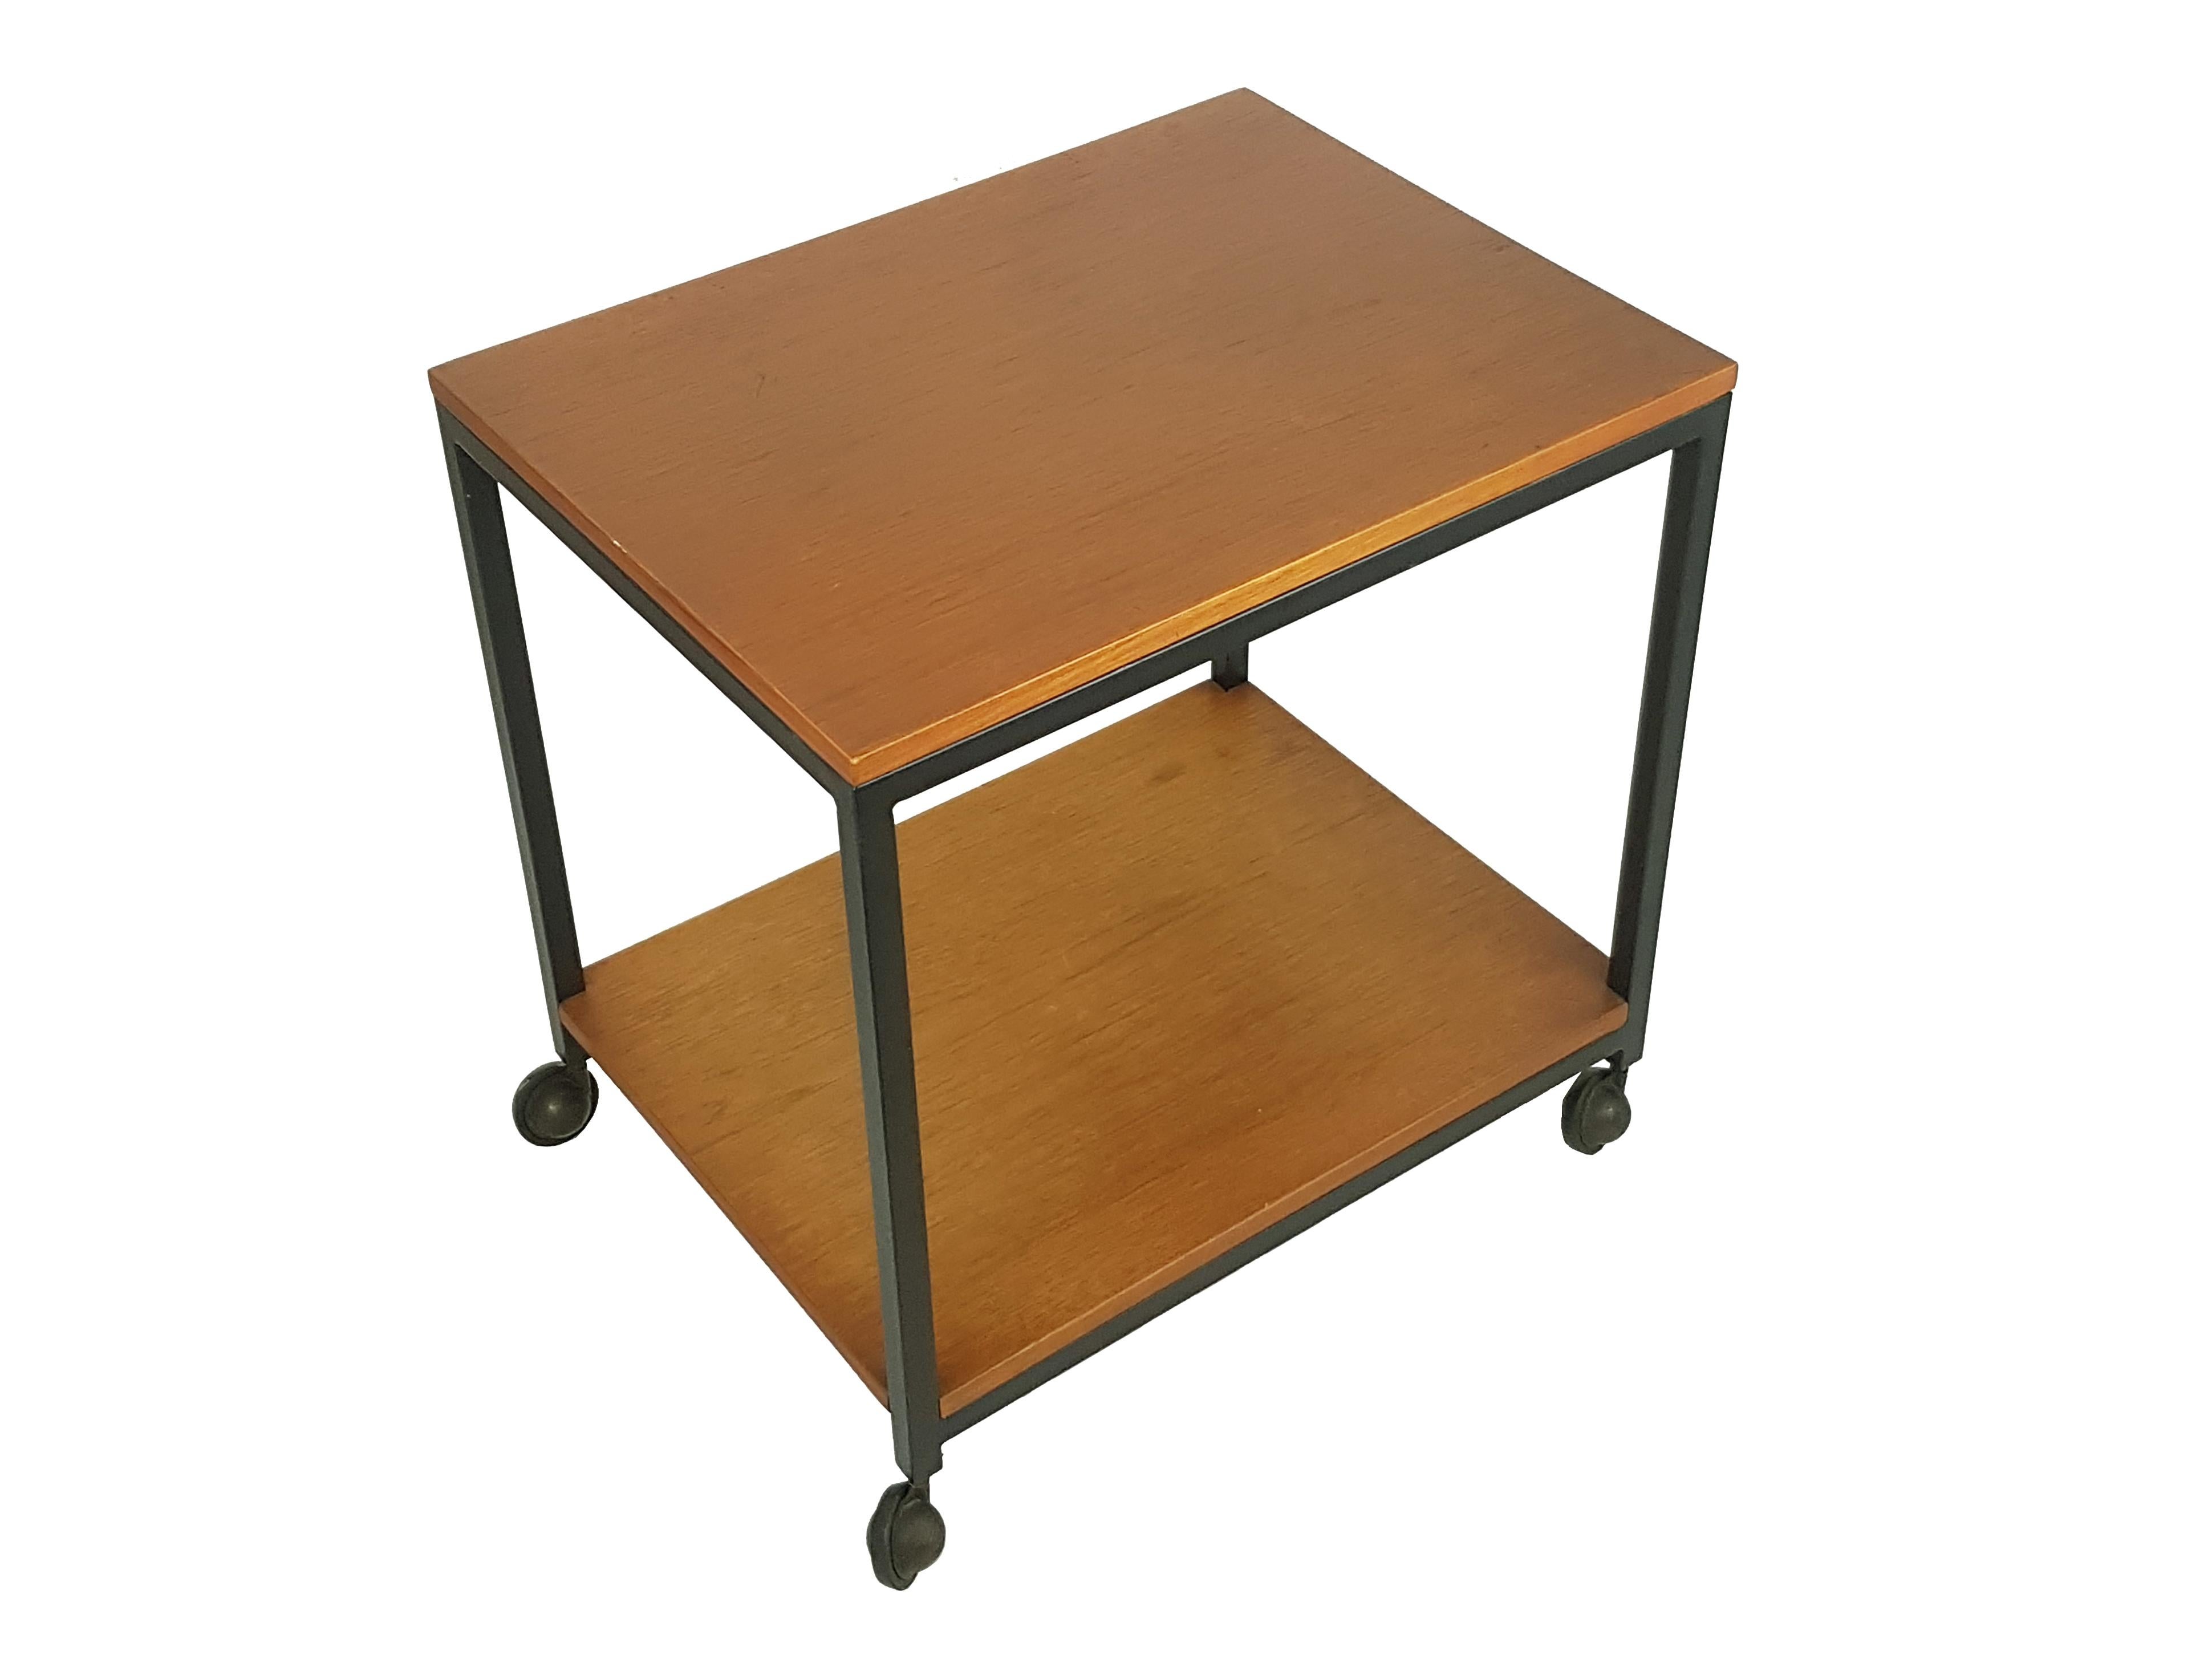 Service table on wheels with two teak shelves. Wear consistent with age and use; some paint loss.